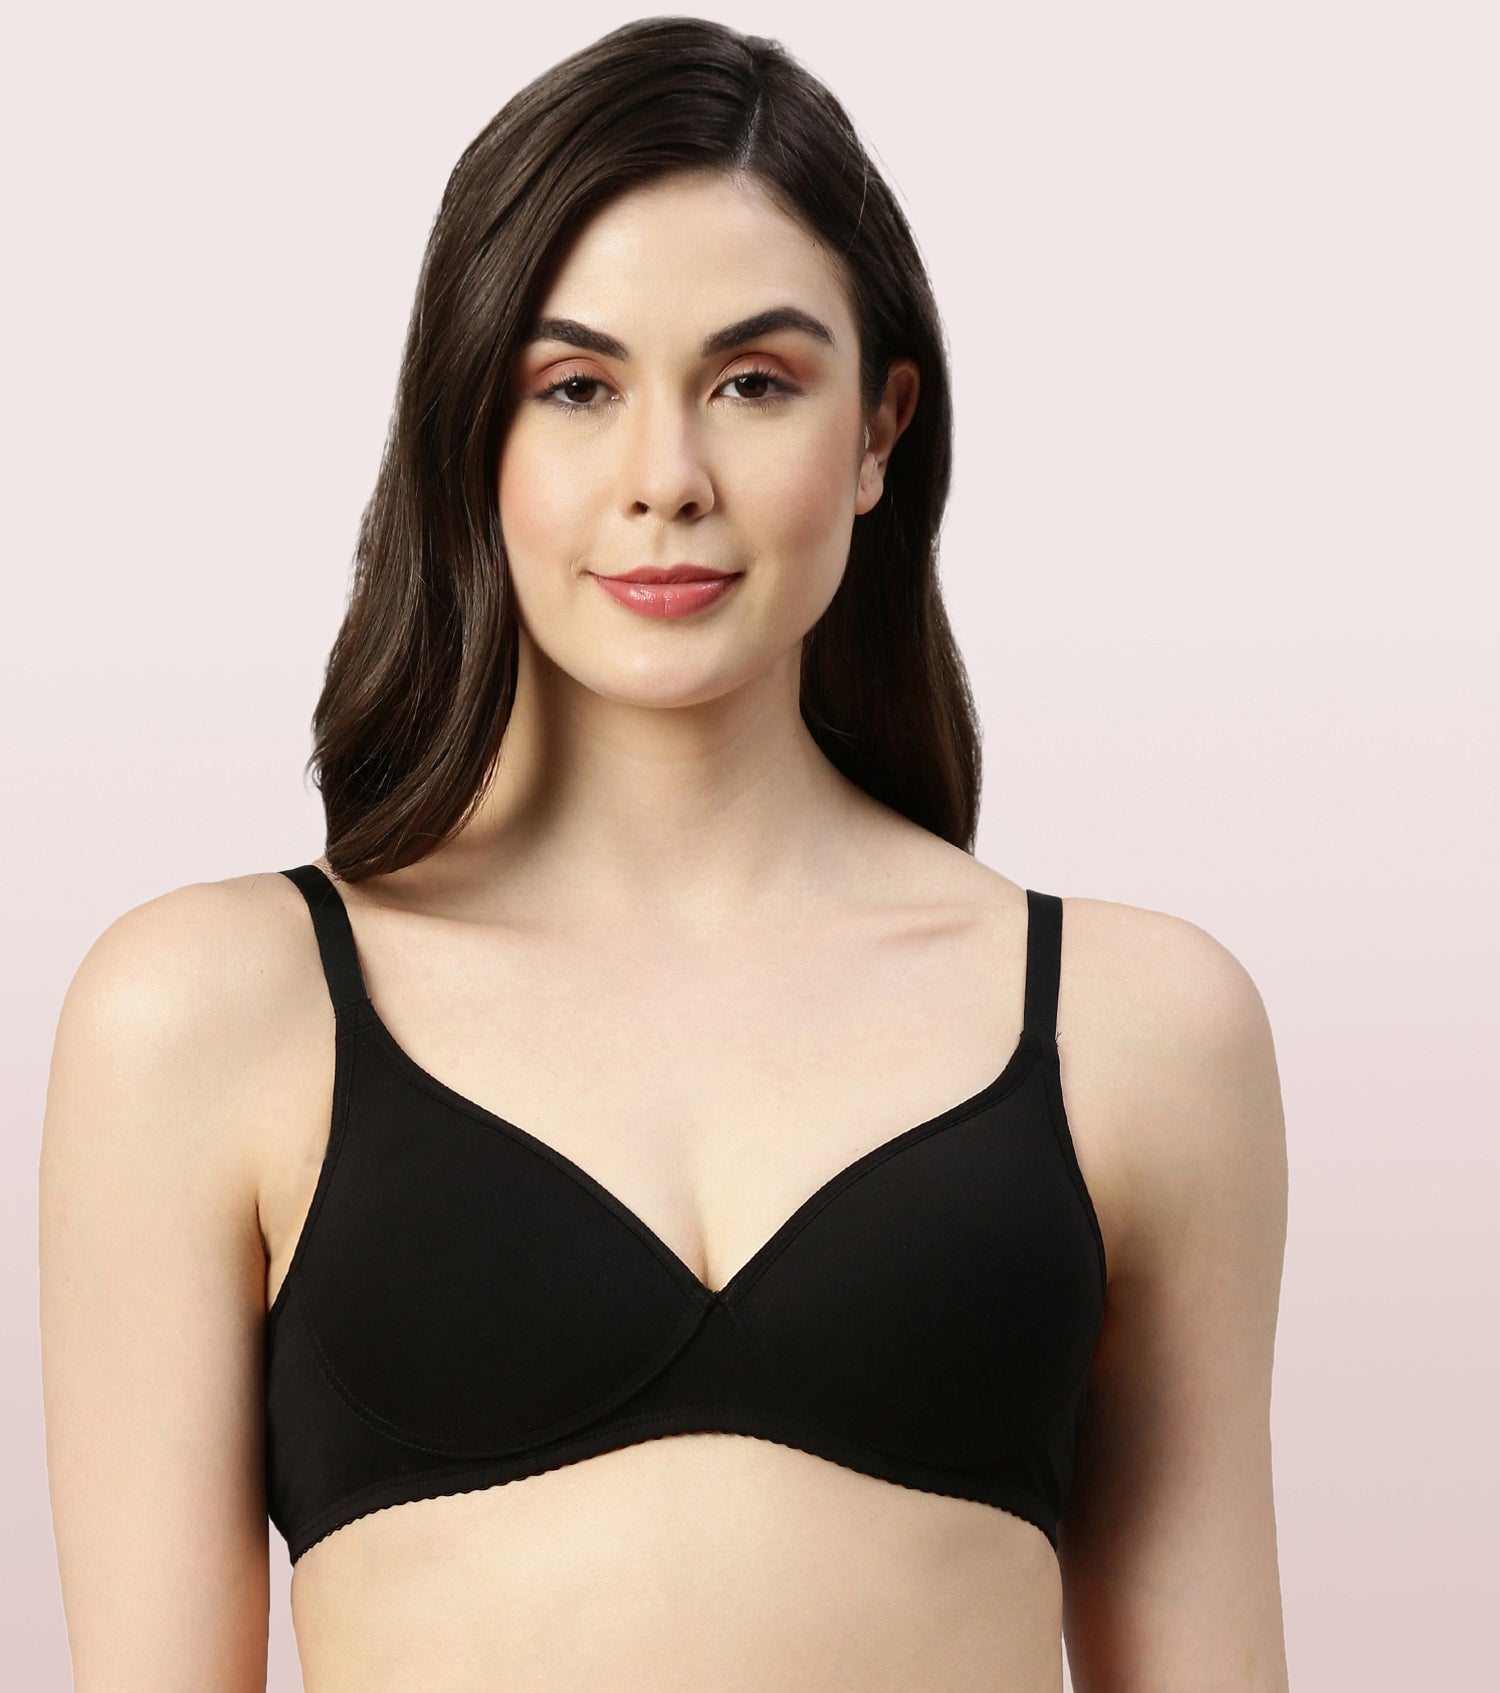 Enamor Perfect Shaping Cotton Non Padded & Wirefree Strapless Bra